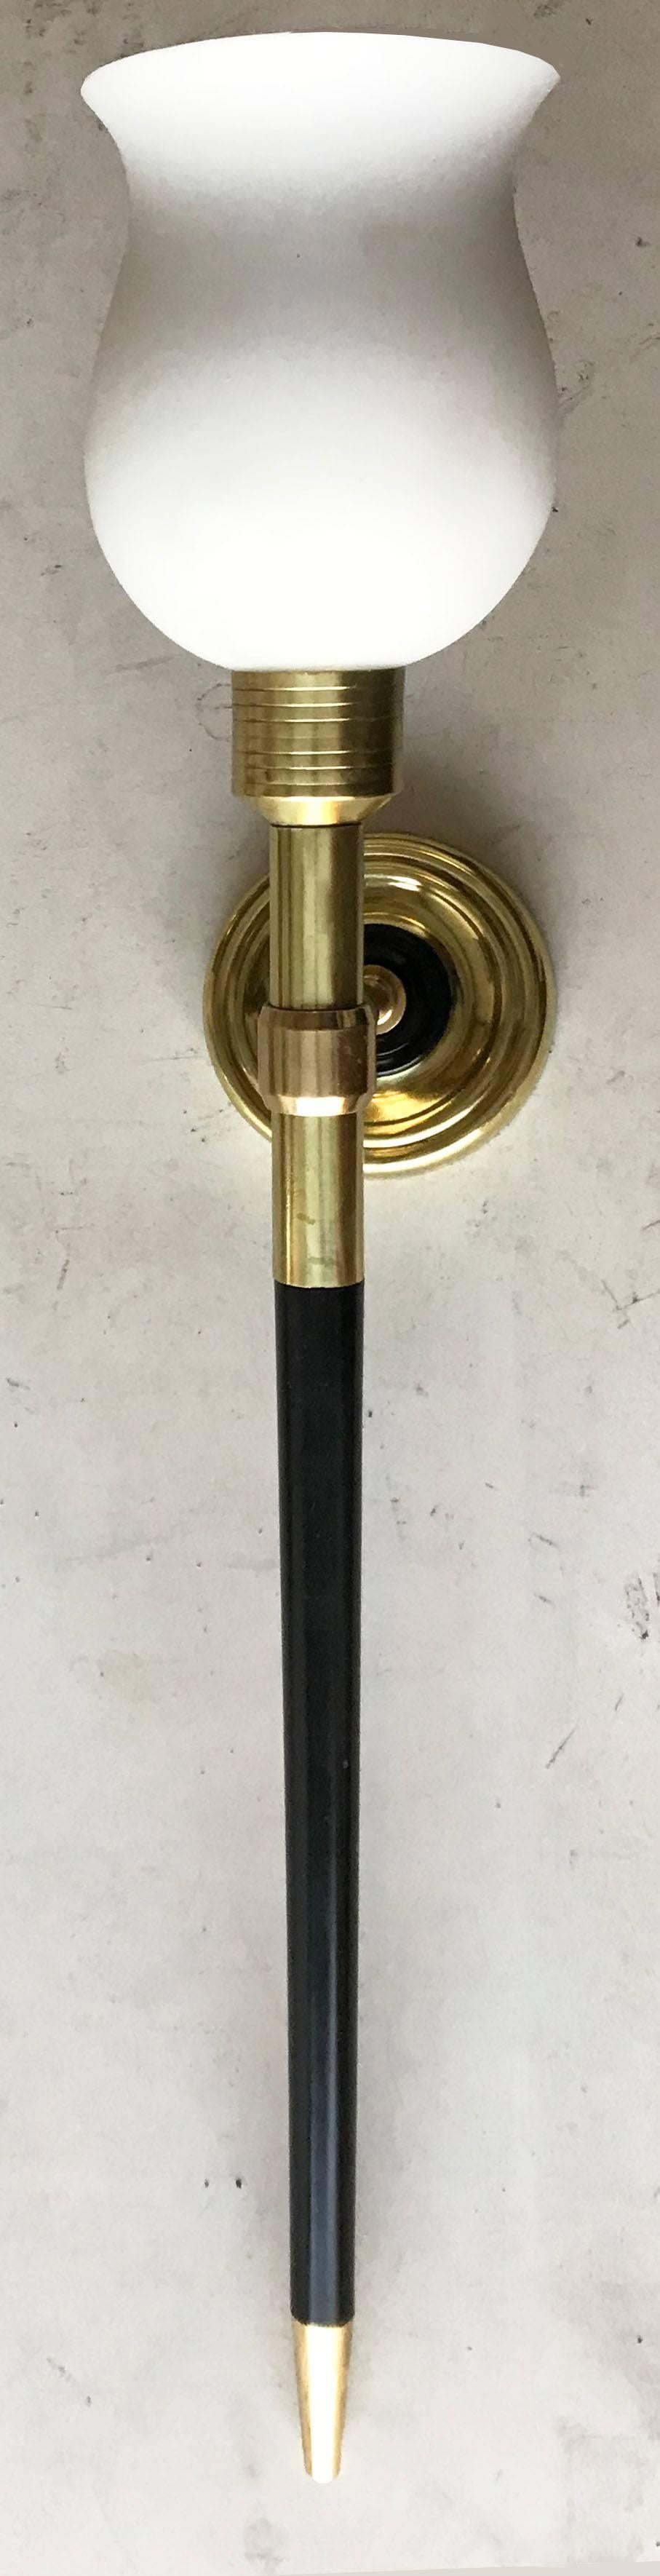 Superb Pair of Maison Jansen Sconces , Brass and Black Lacquered .
US Rewired and in Working condition 
1 Light , 65 watts light Max bulb

Back Plate : 4 inches Diameter